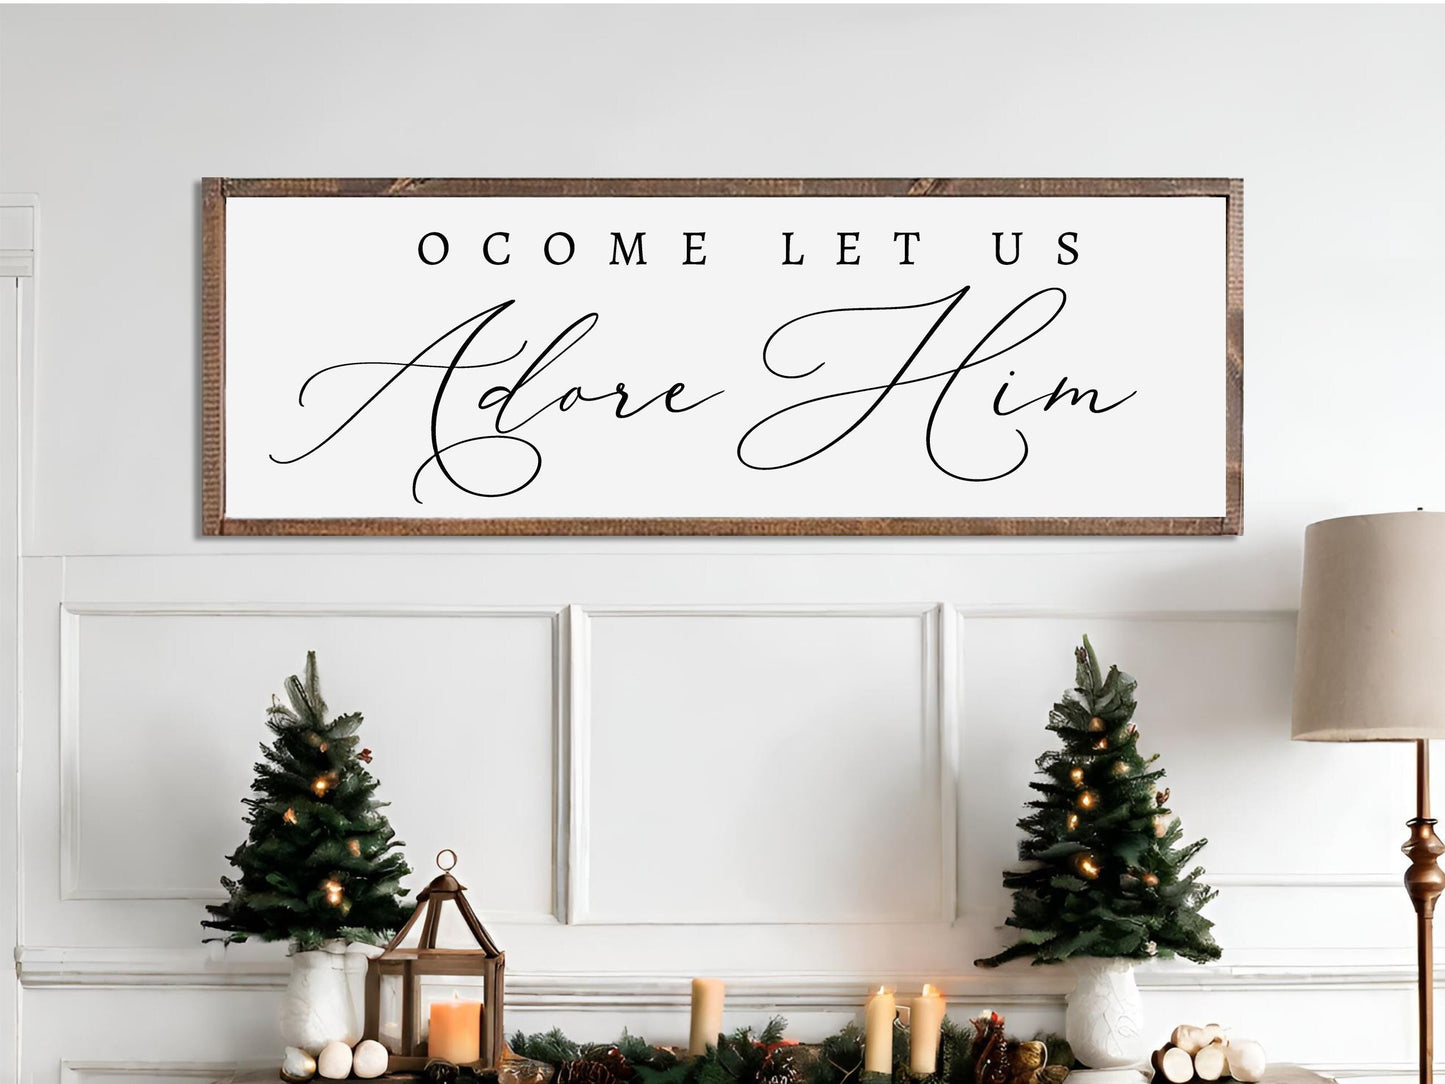 O Come Let Us Adore Him - Christmas Home Décor, Modern Farmhouse Wood Sign | Large Christmas wood sign | Christmas Décor, Christian Wall Art